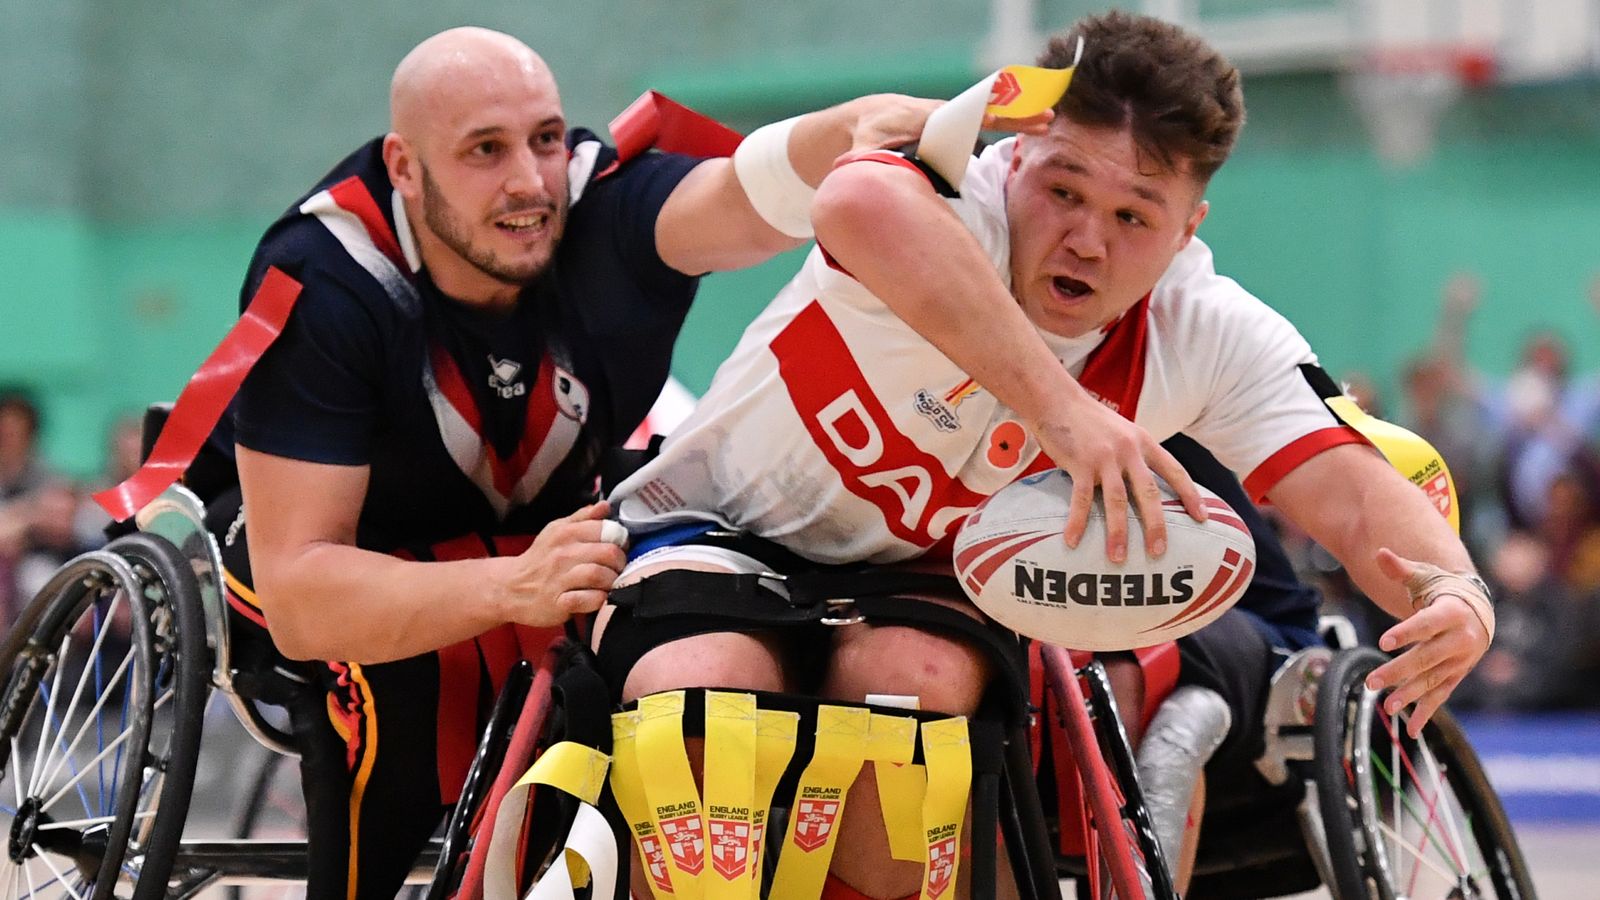 Josh Butler, Martin Norris in England Wheelchair squad vs France in Manchester live on Sky Sports